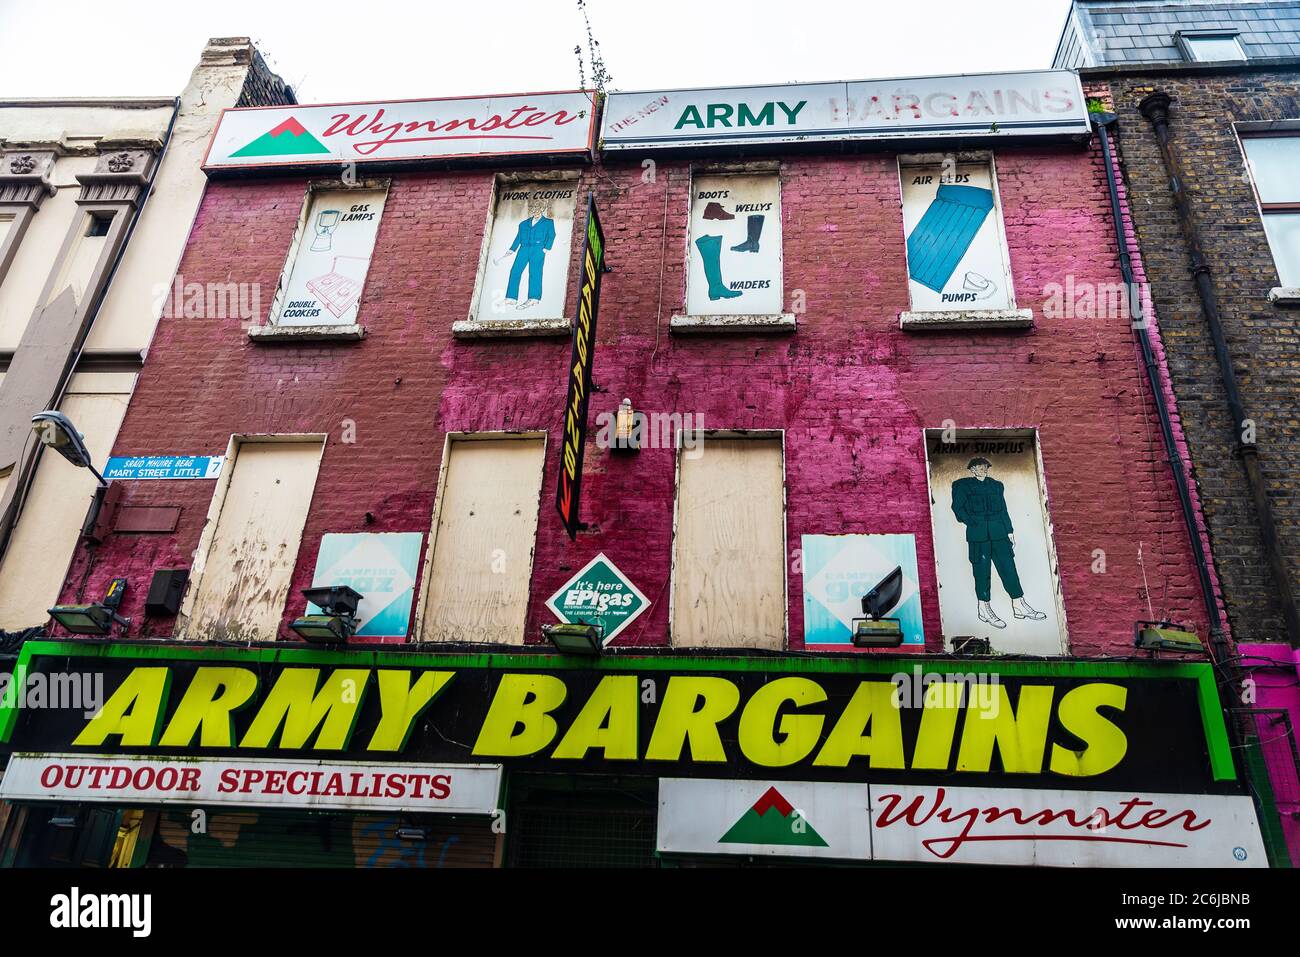 Dublin, Ireland - December 30, 2019: Army bargains shop, specialized in Army surplus equipment and Camping gear, in Dublin, Ireland Stock Photo